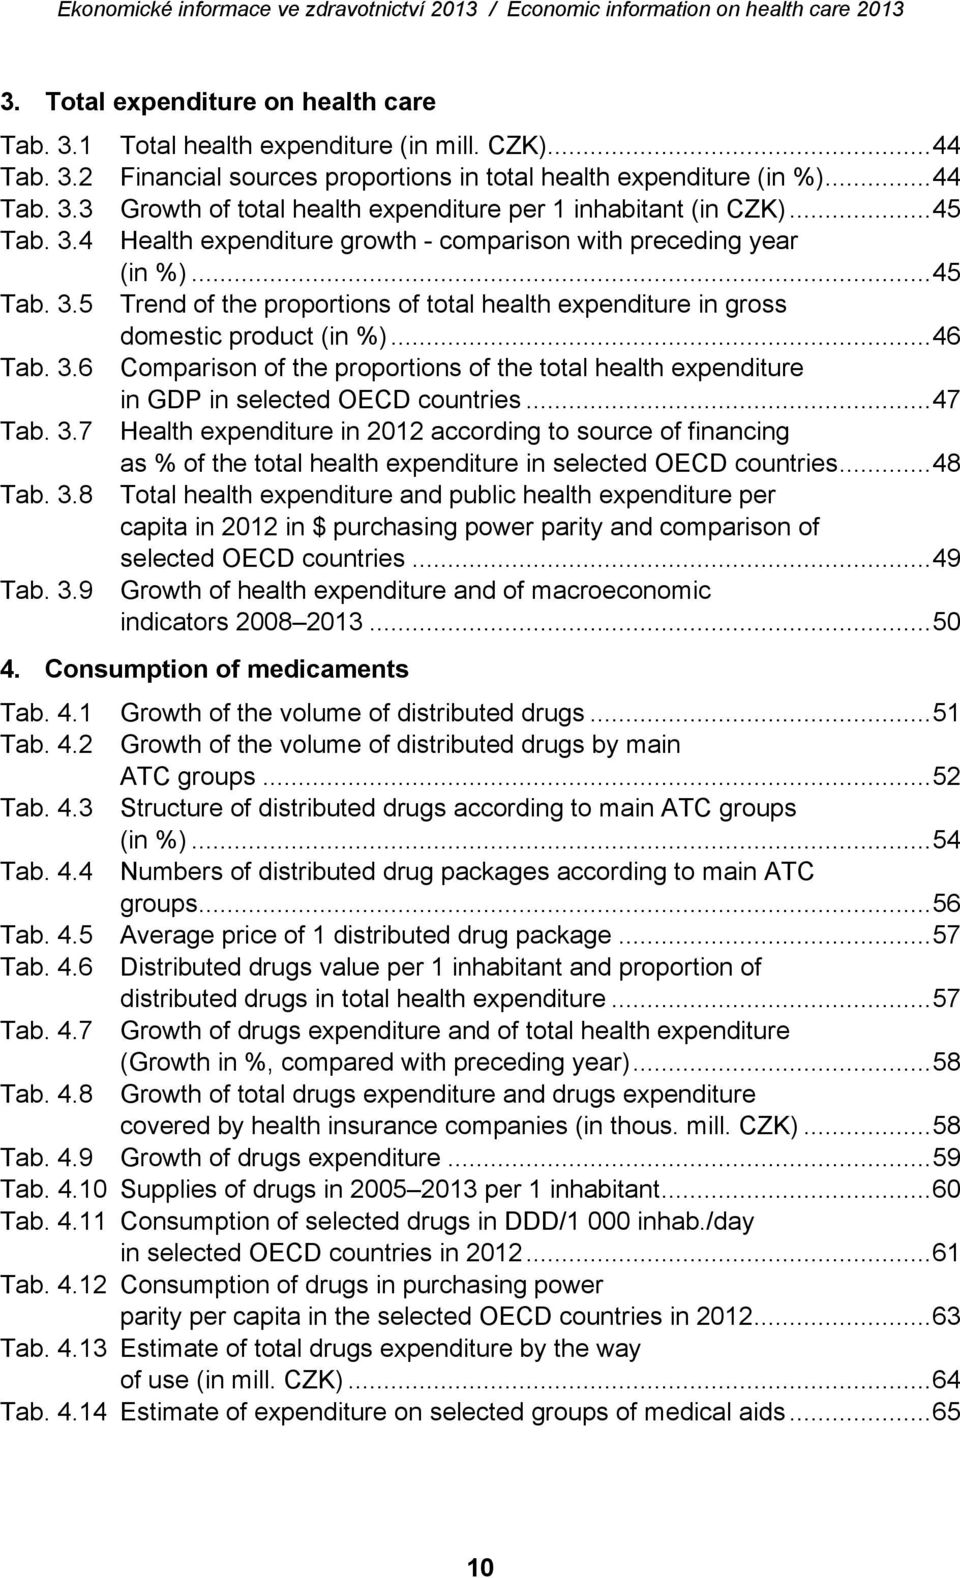 .. 47 Tab. 3.7 Health expenditure in 2012 according to source of financing as % of the total health expenditure in selected OECD countries... 48 Tab. 3.8 Total health expenditure and public health expenditure per capita in 2012 in $ purchasing power parity and comparison of selected OECD countries.